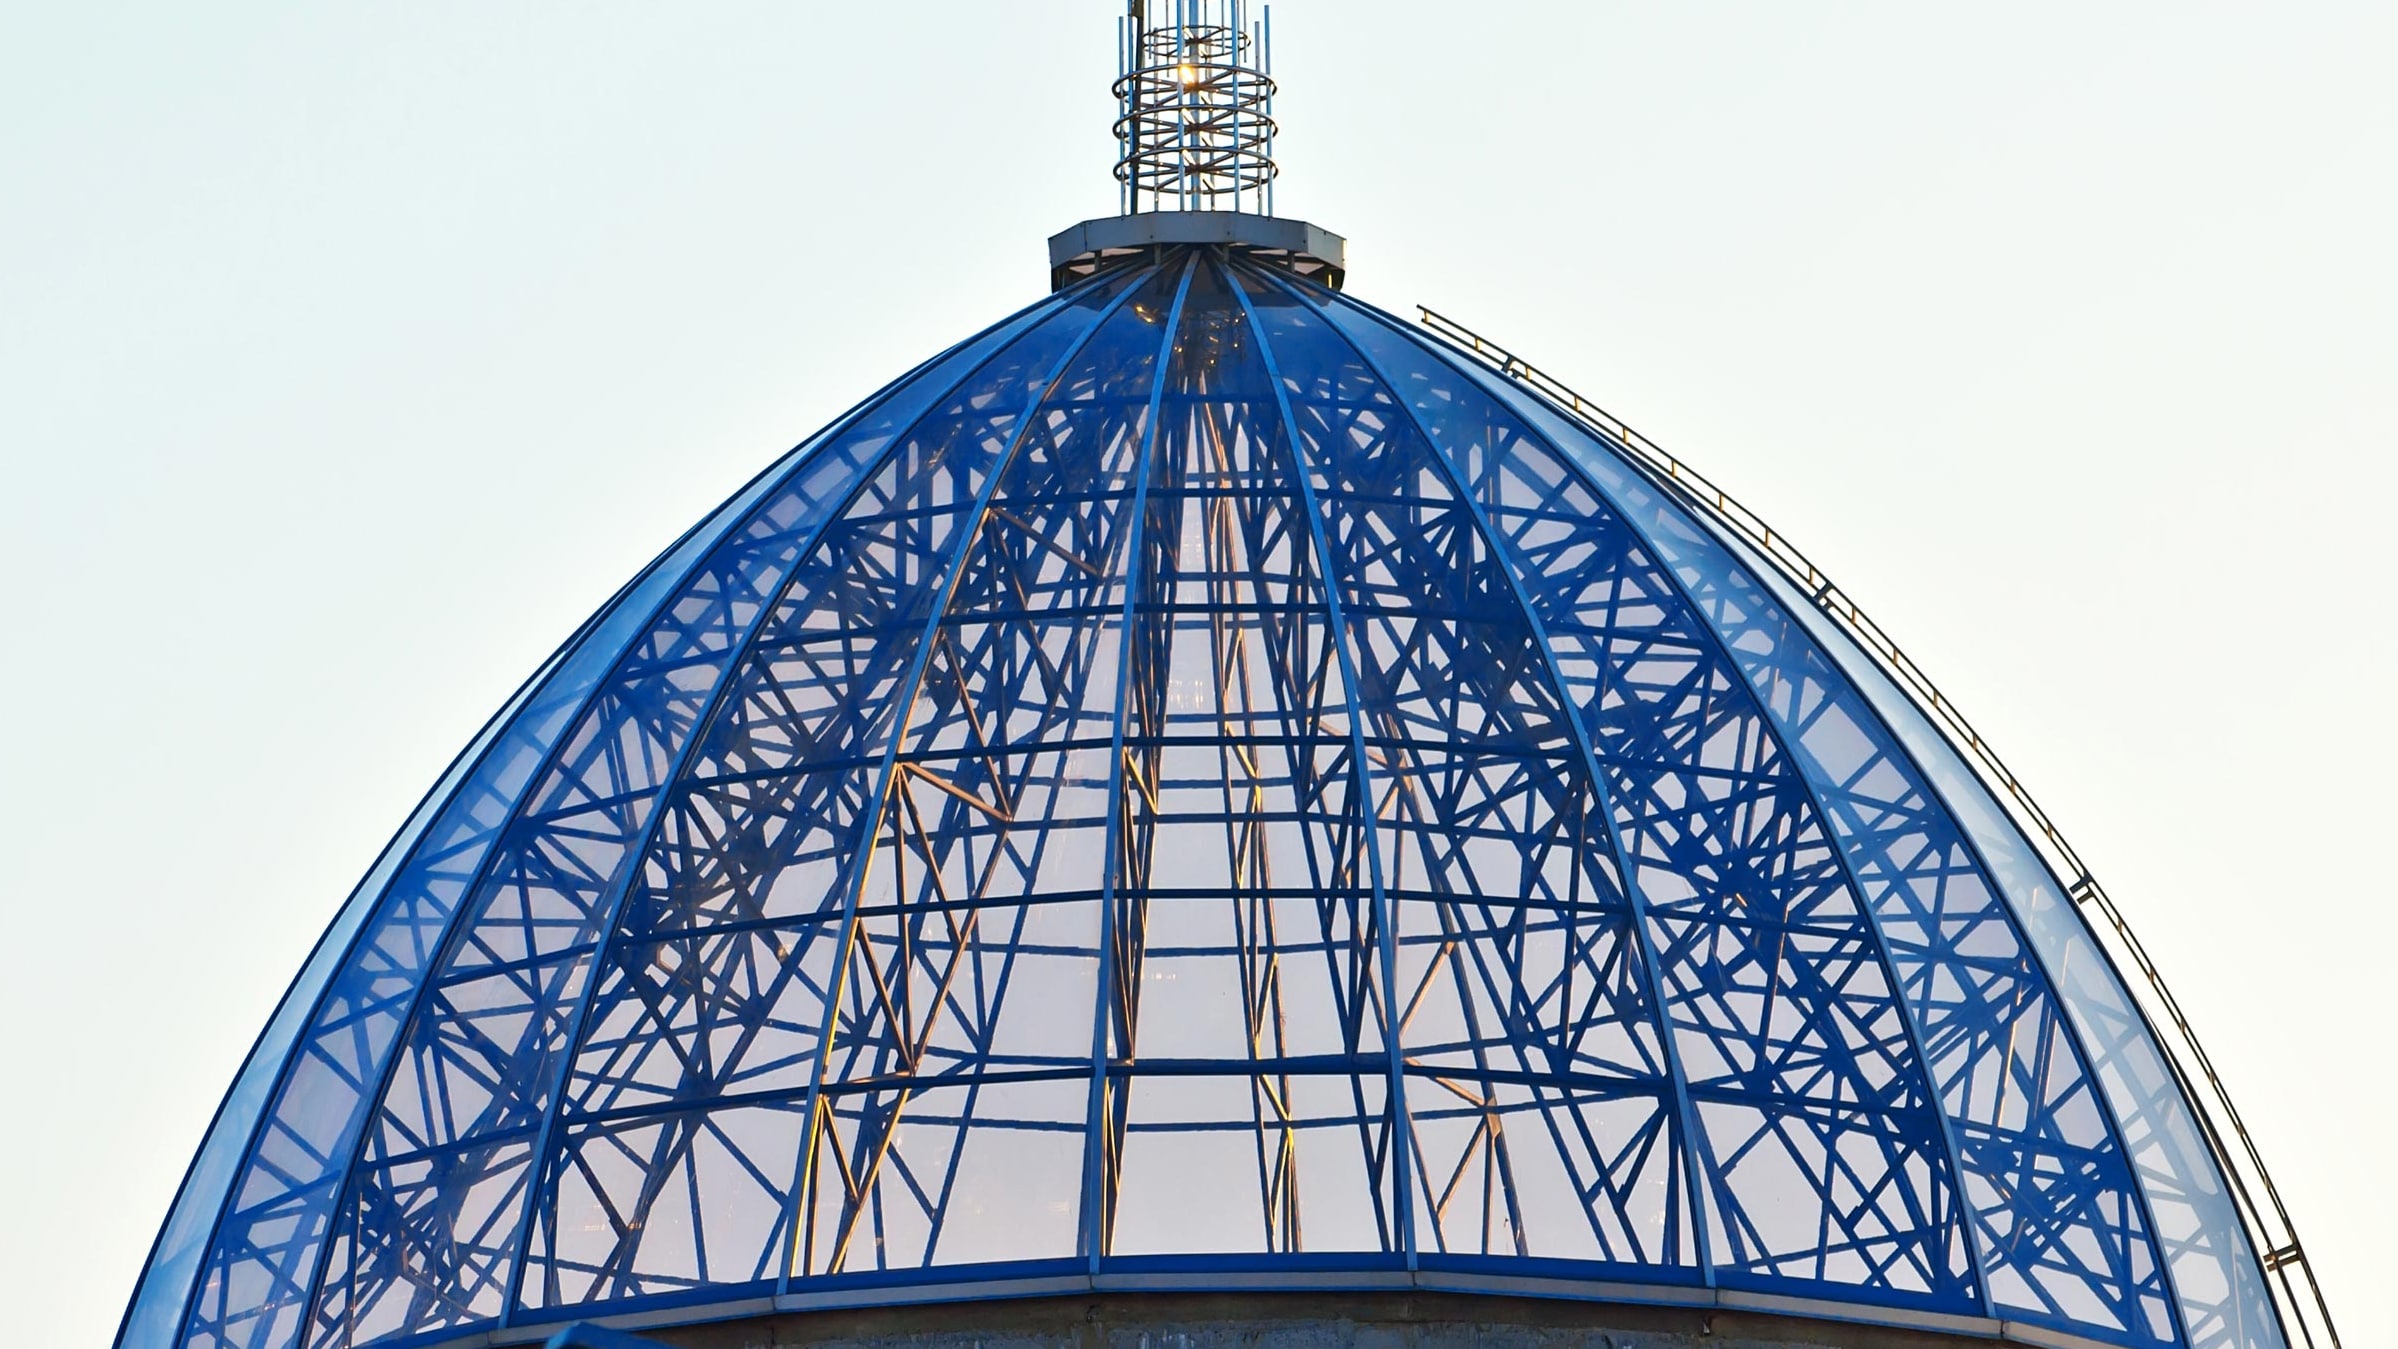 Glass dome on a background of blue sky